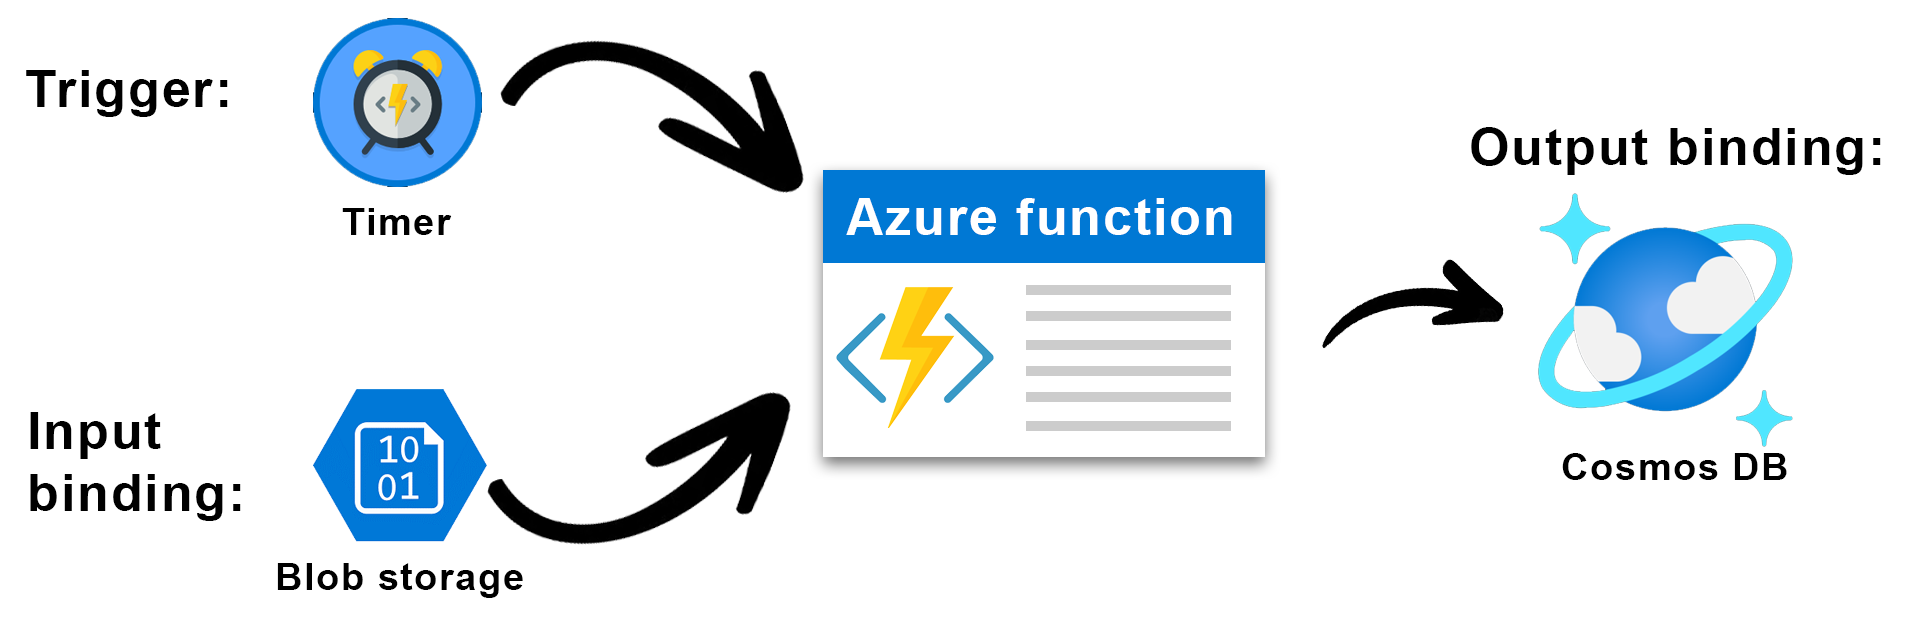 A trigger, input and output binding make up this Azure function